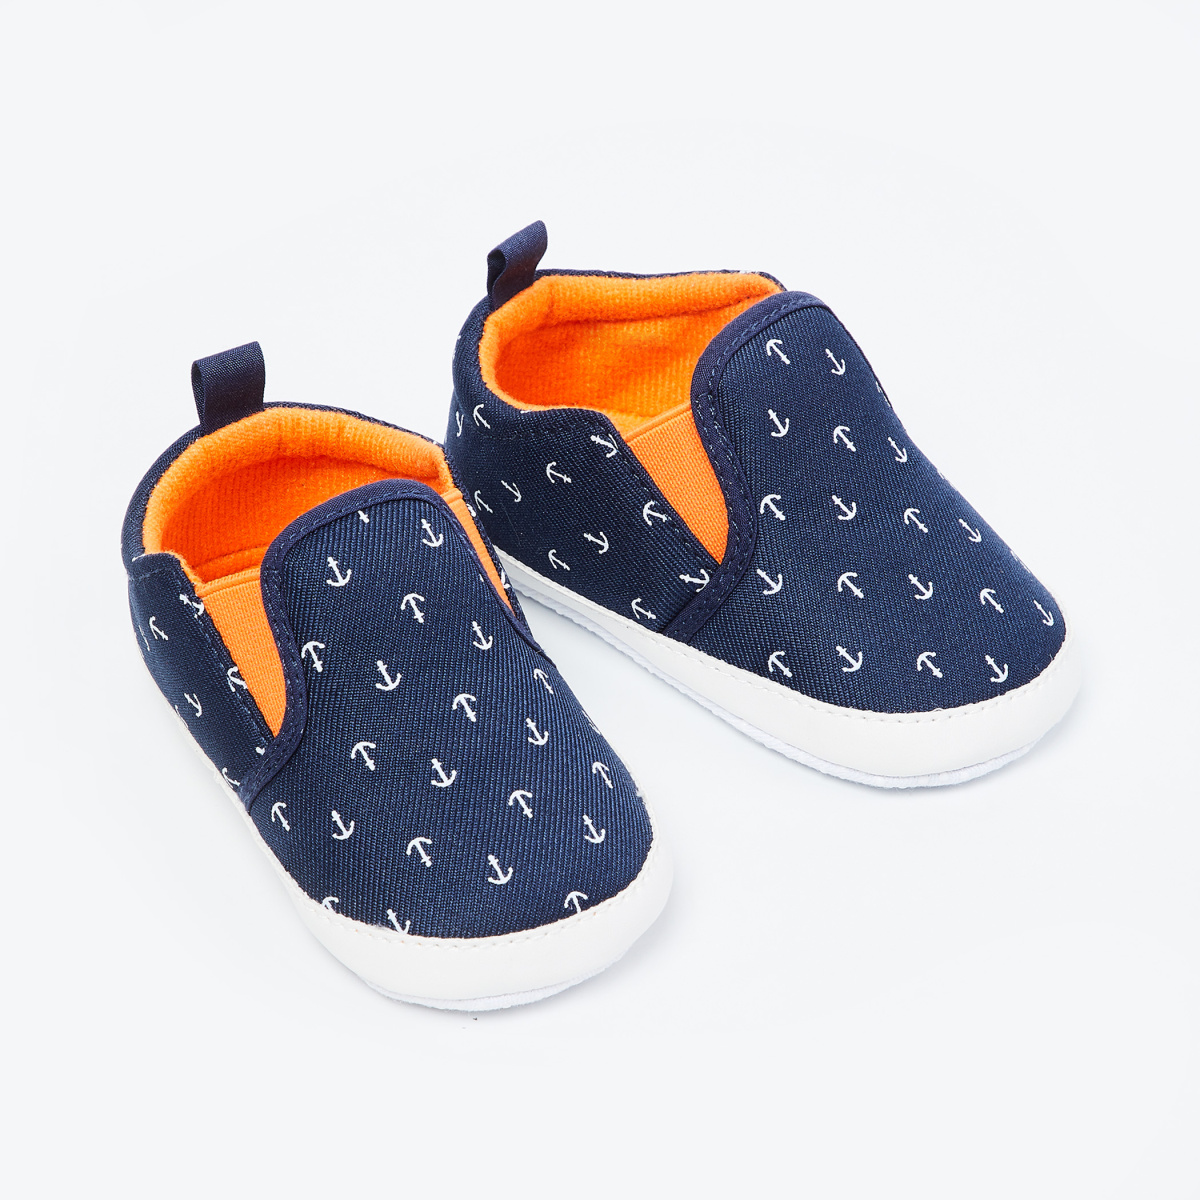 FAME FOREVER Printed Slip-On Shoes with Contrast Gusset